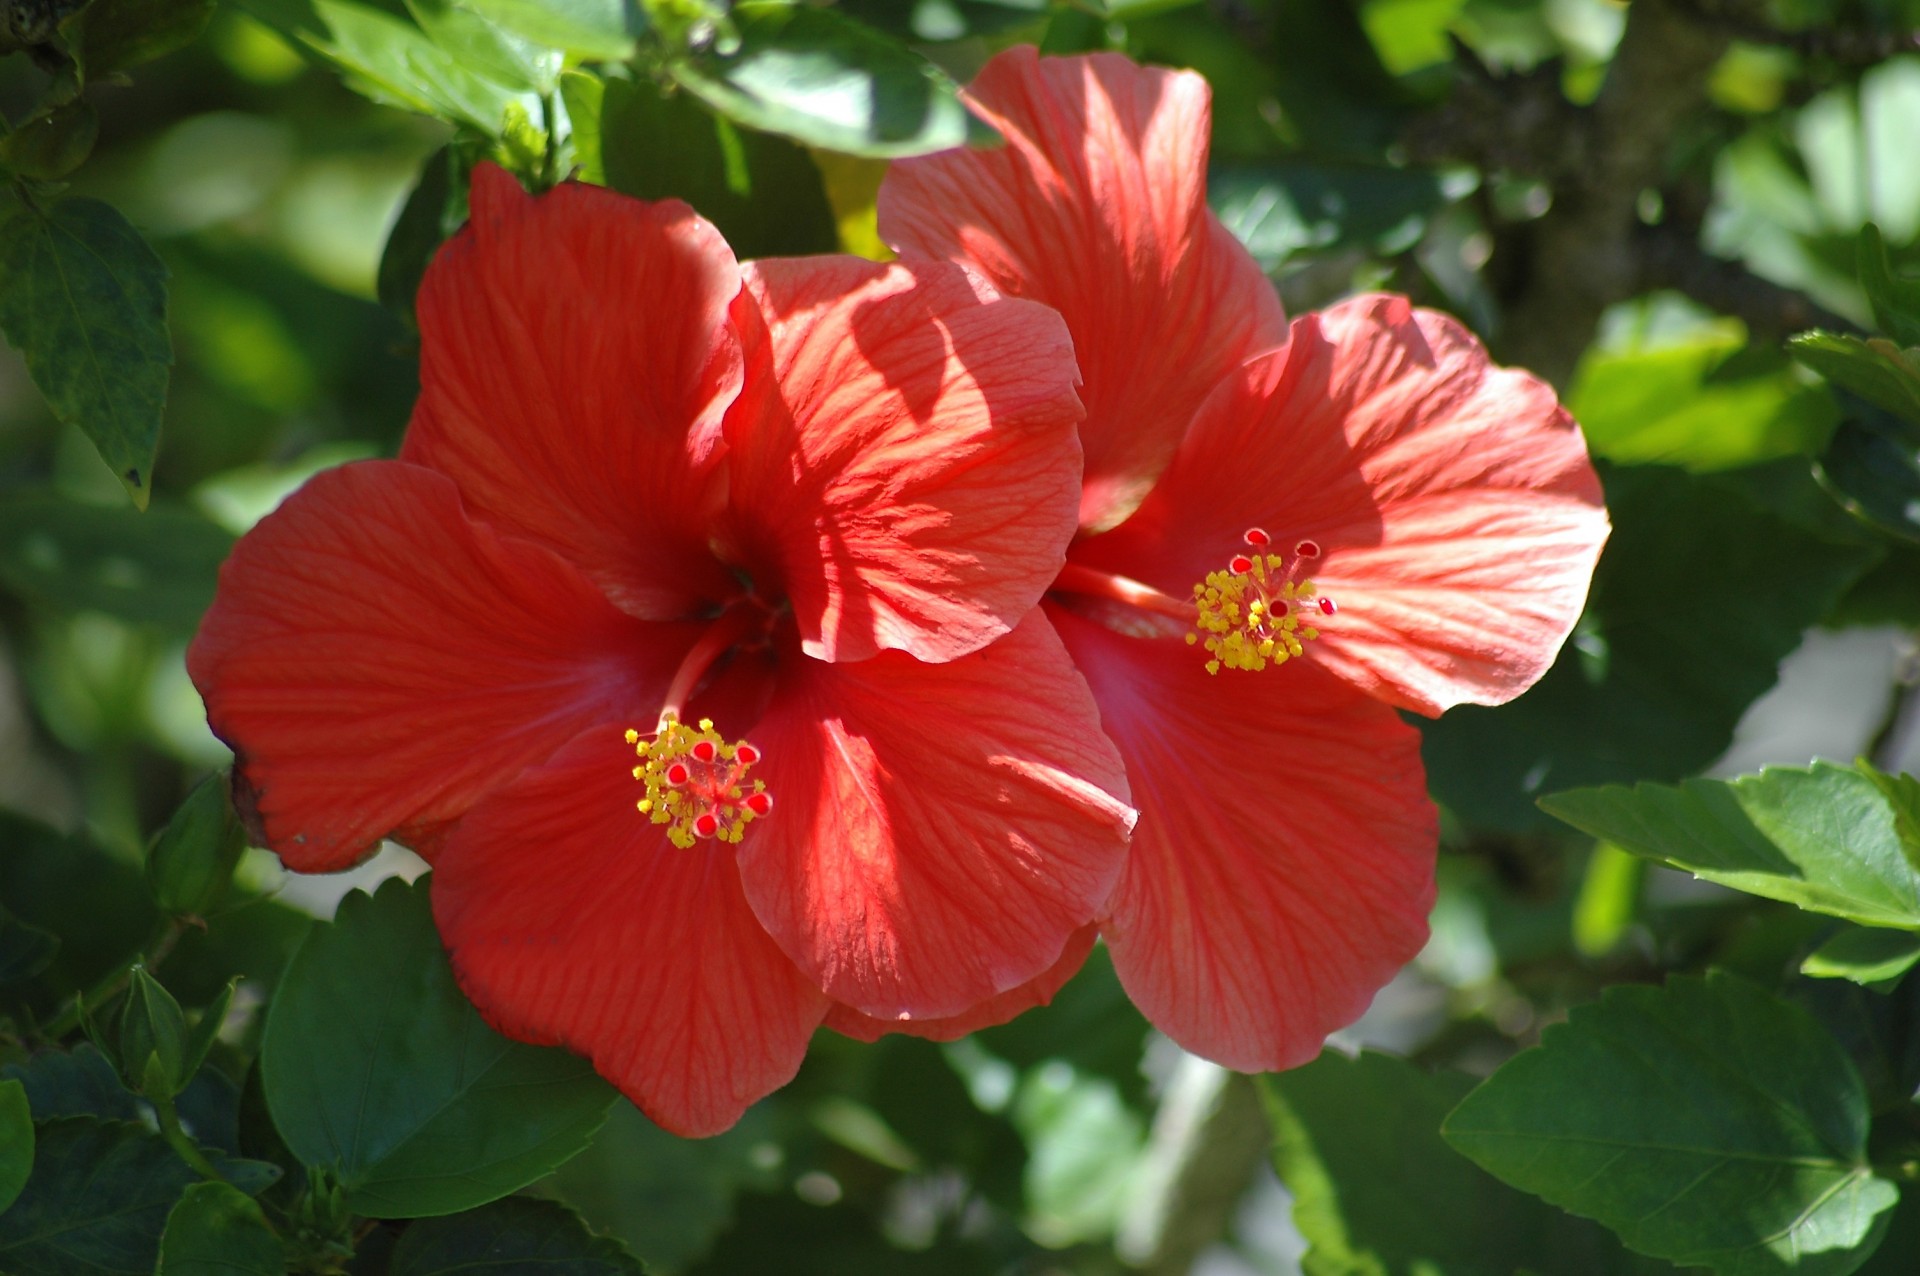 Vibrant Red Hibiscus flowers at garden Florida, USA